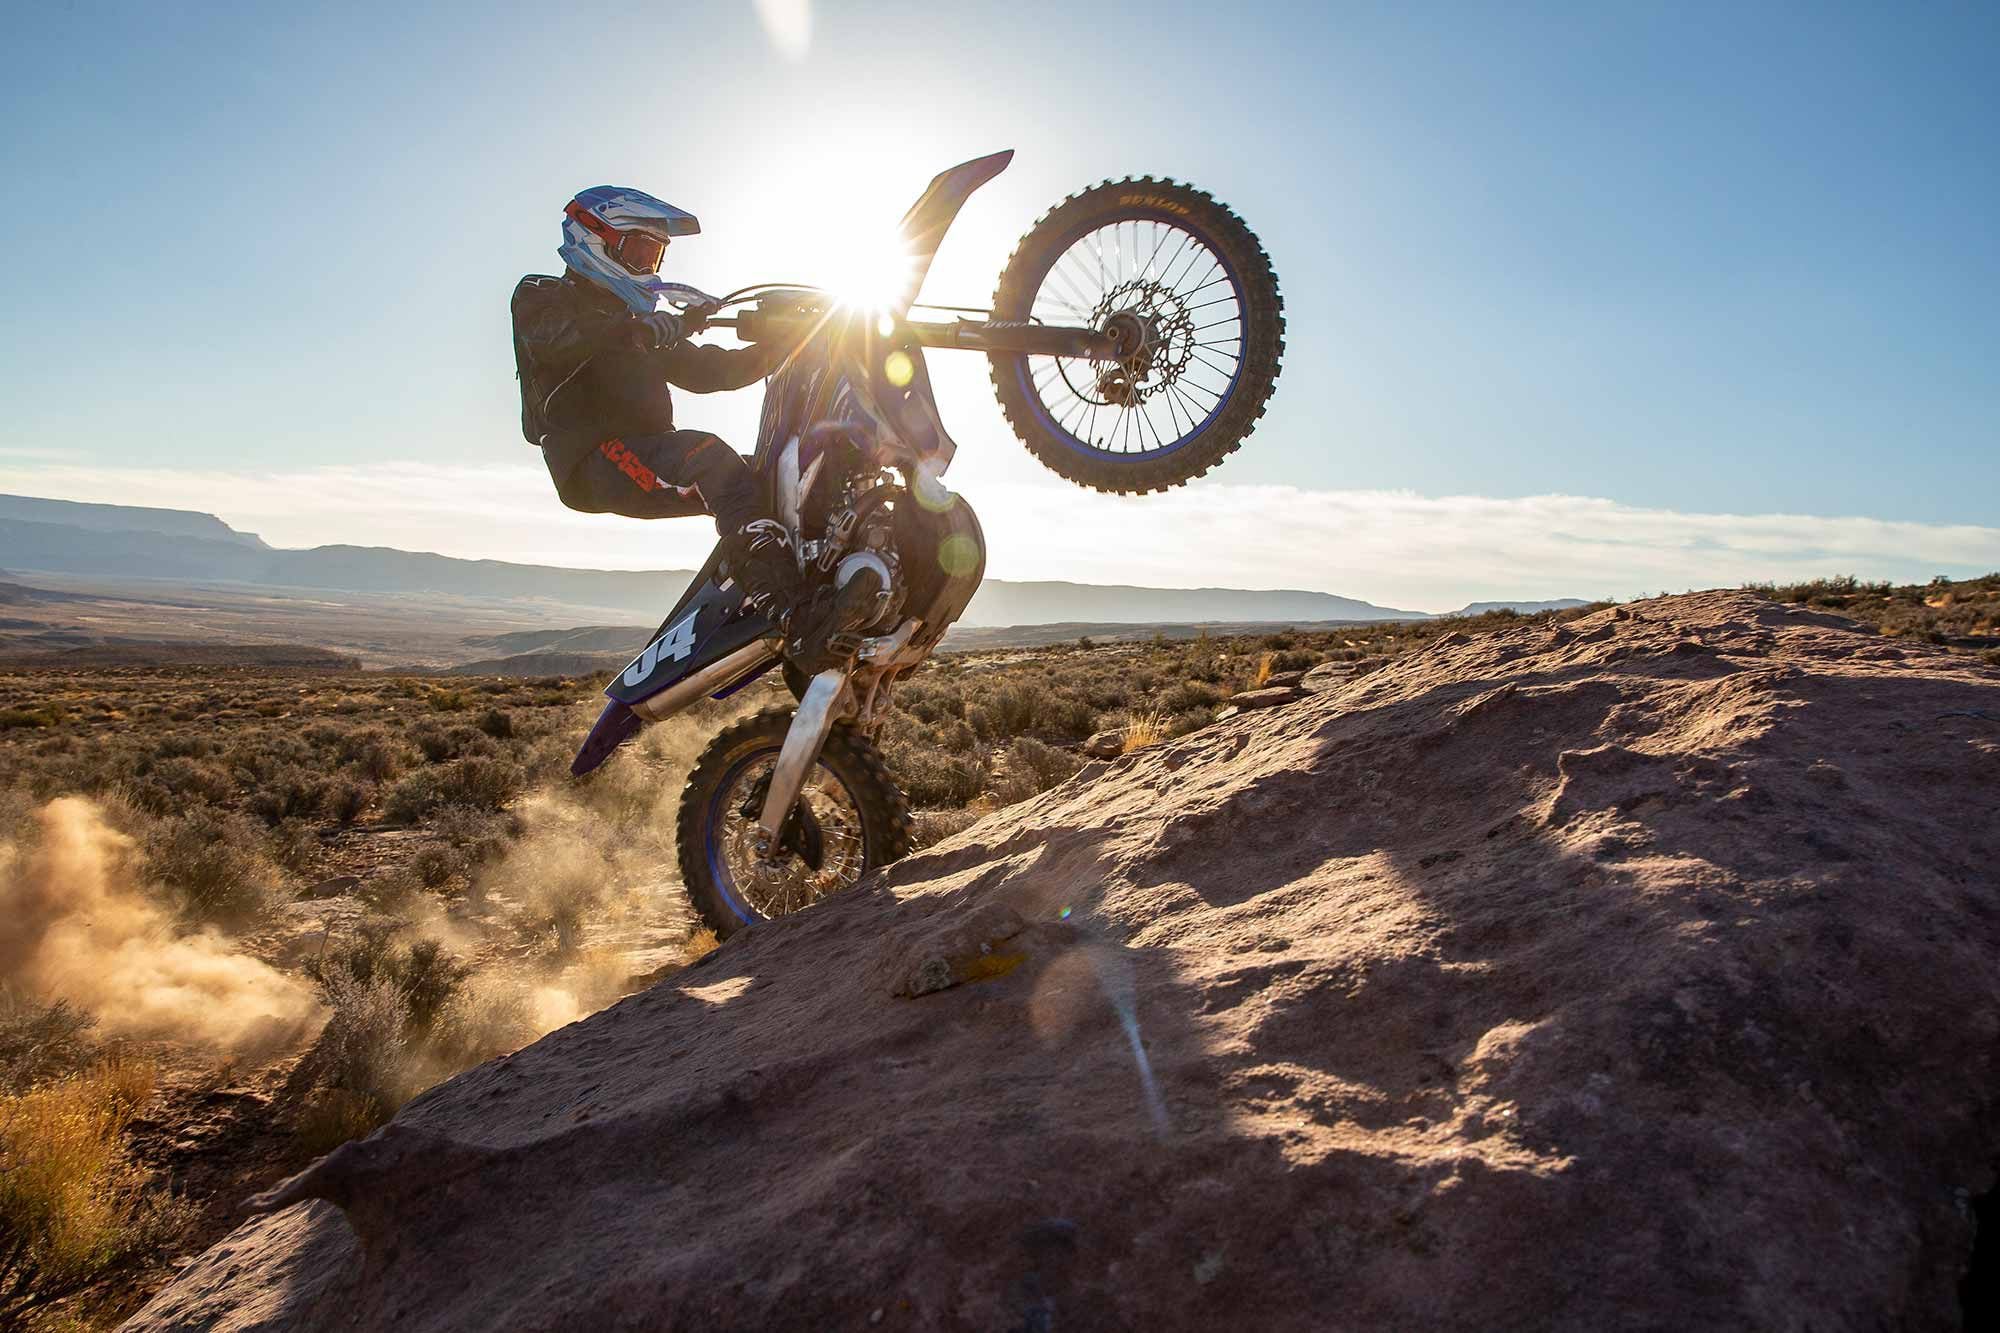 Trials-like maneuvers are encouraged while at the controls of the YZ250FX due to its remarkable amount of torque and crisp throttle response.